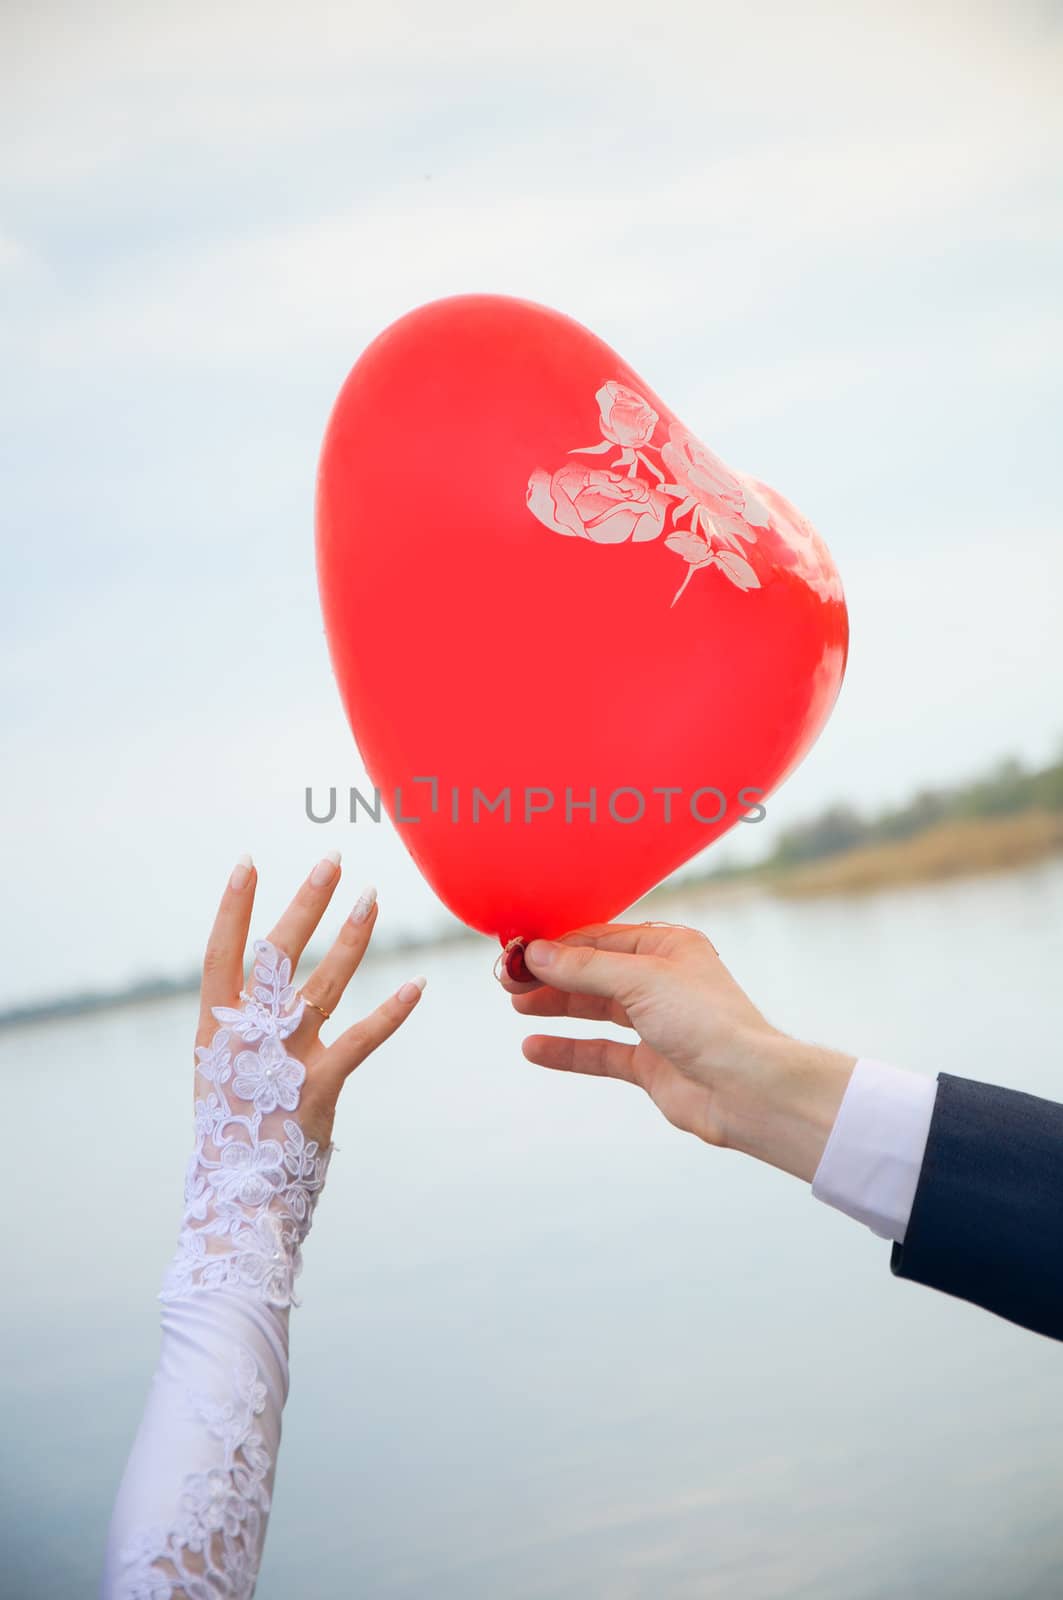 groom gives a balloon form of heart to bride. Wedding hands. Playful scene